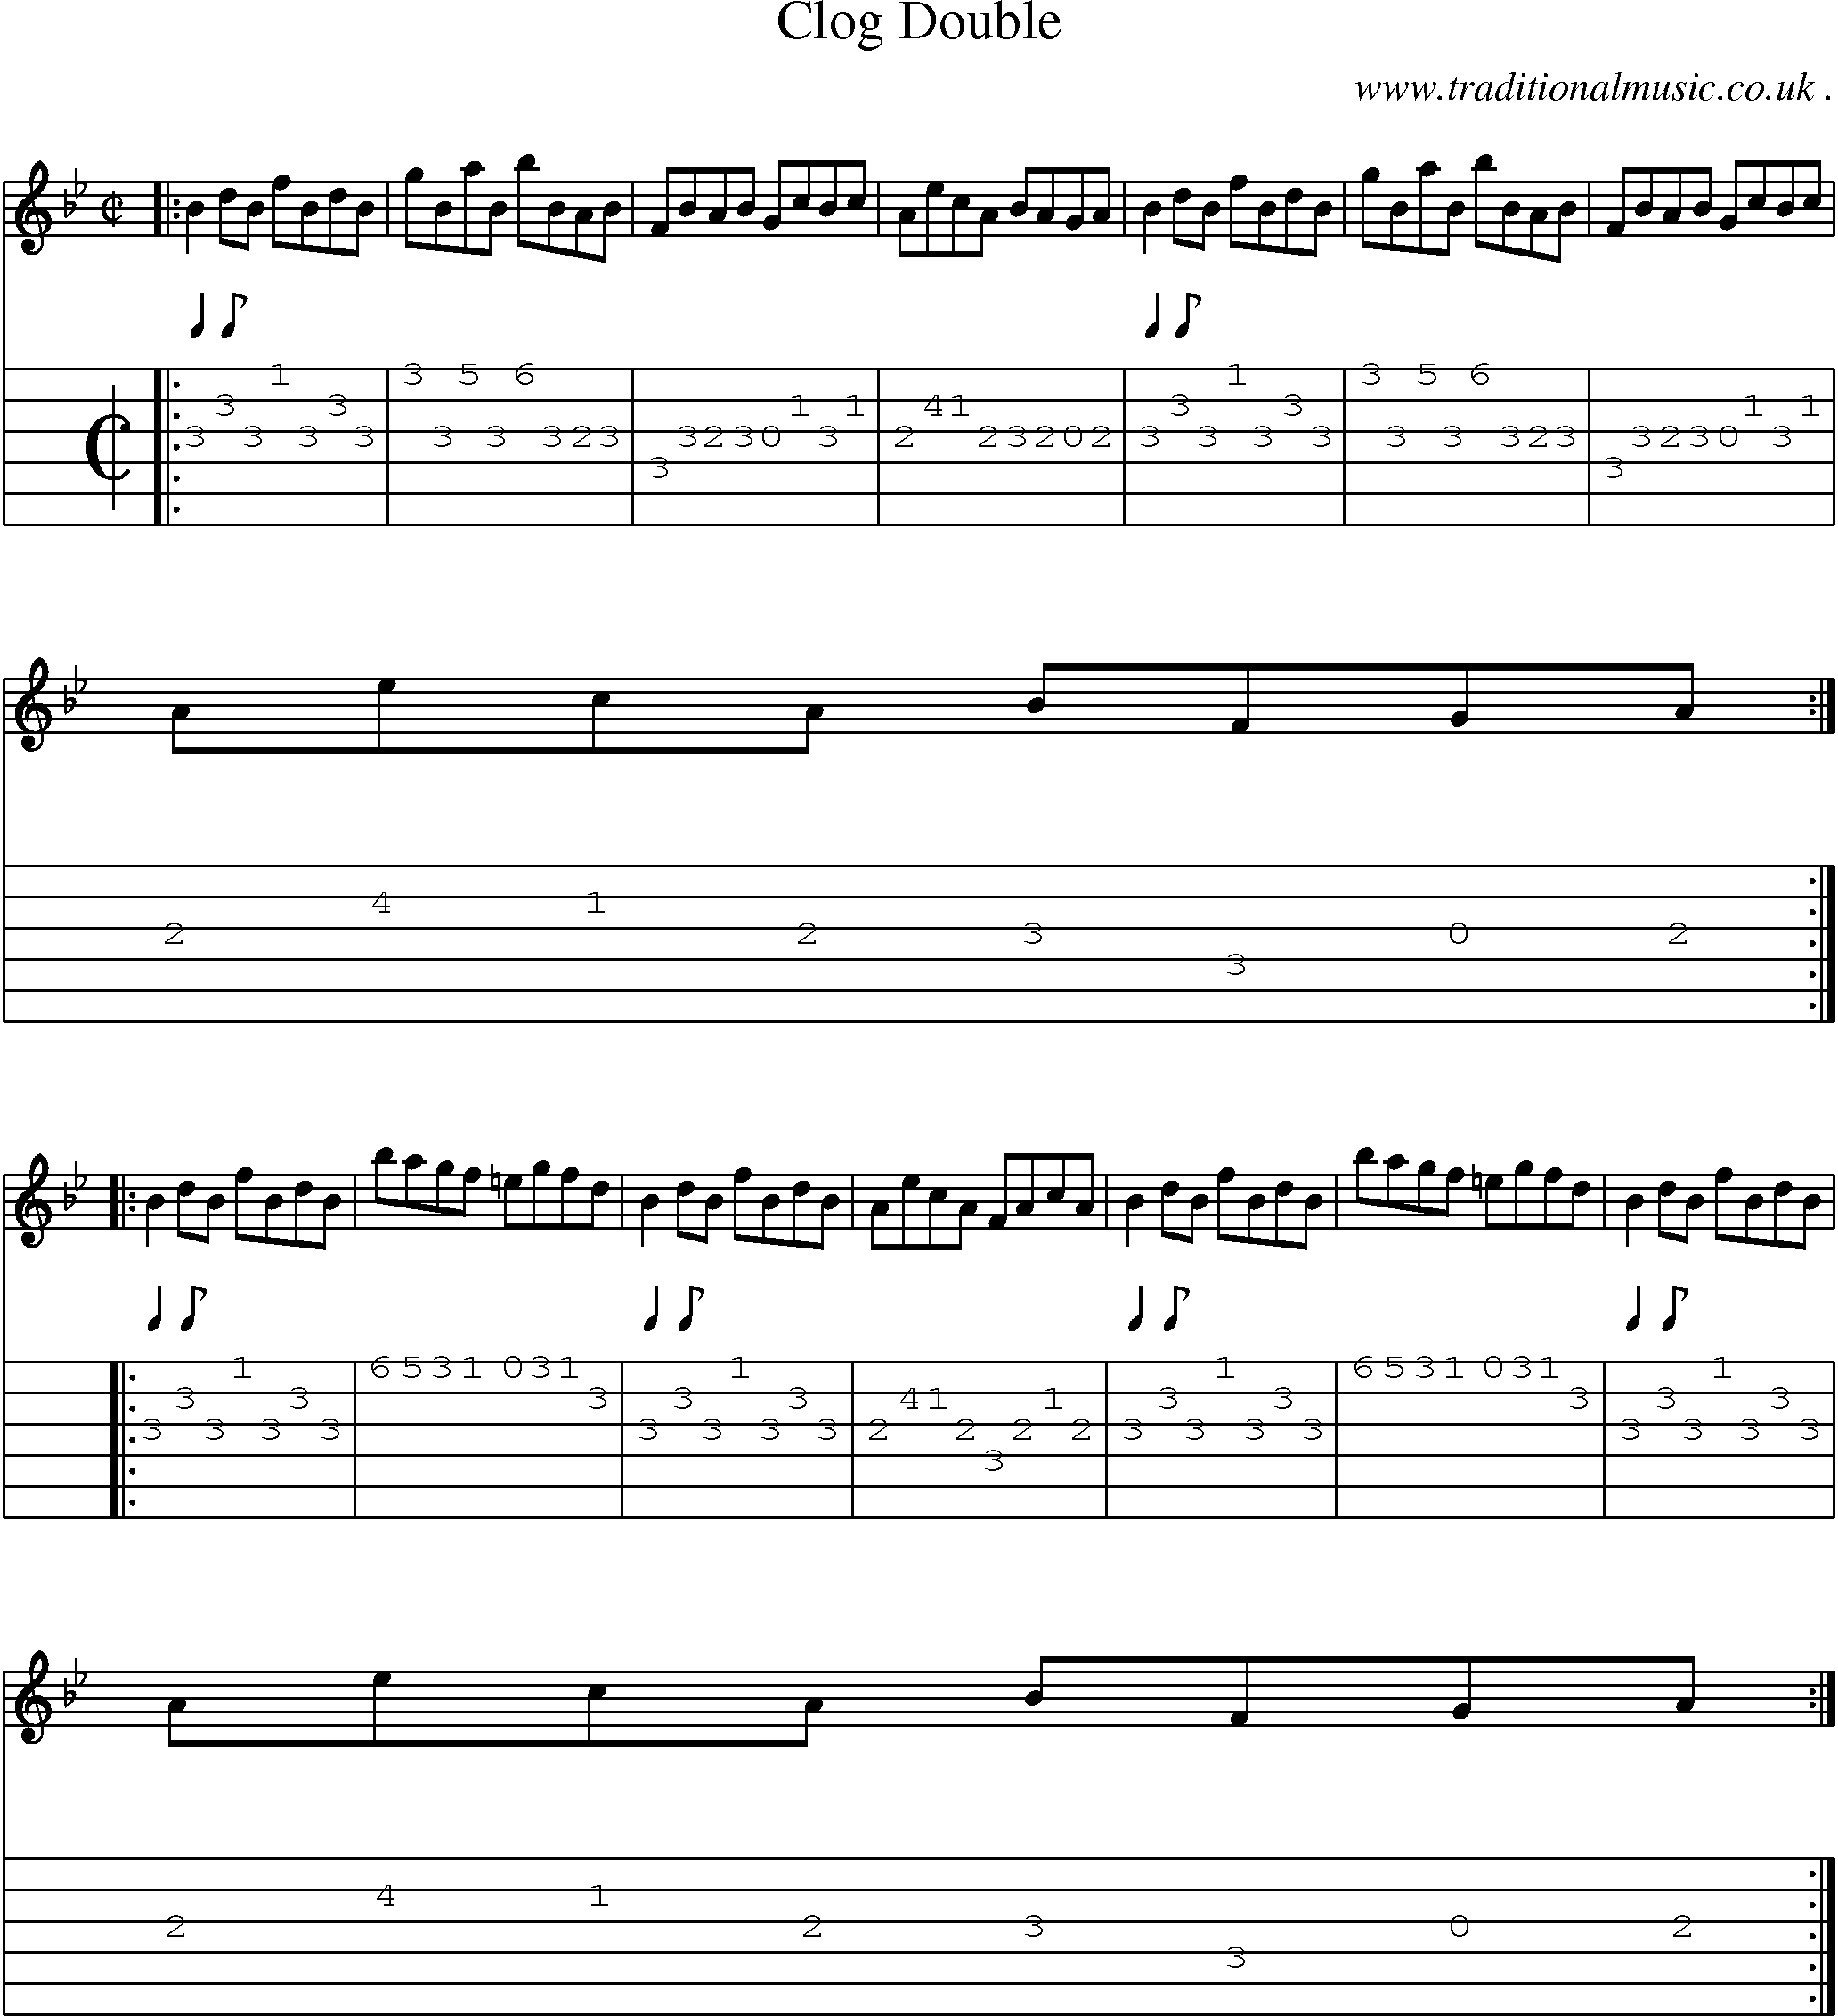 Sheet-Music and Guitar Tabs for Clog Double